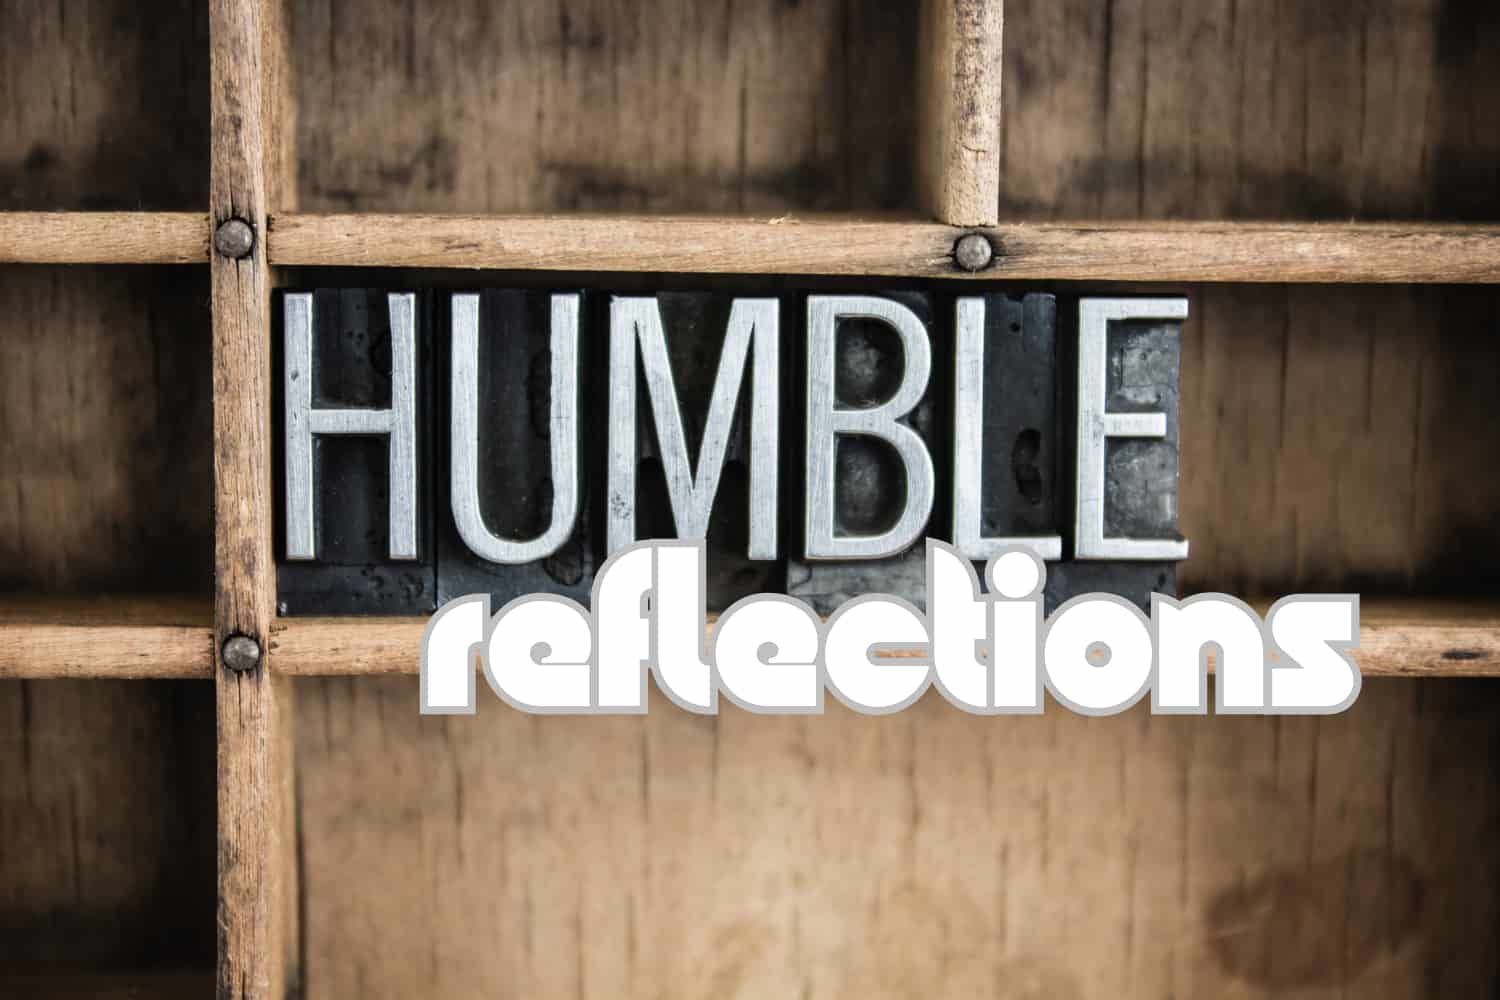 Object%20lesson%20-%20NT%20The%20pharisee%20and%20the%20tax%20collector%20-%20Humble%20reflections-5792de36 Luke